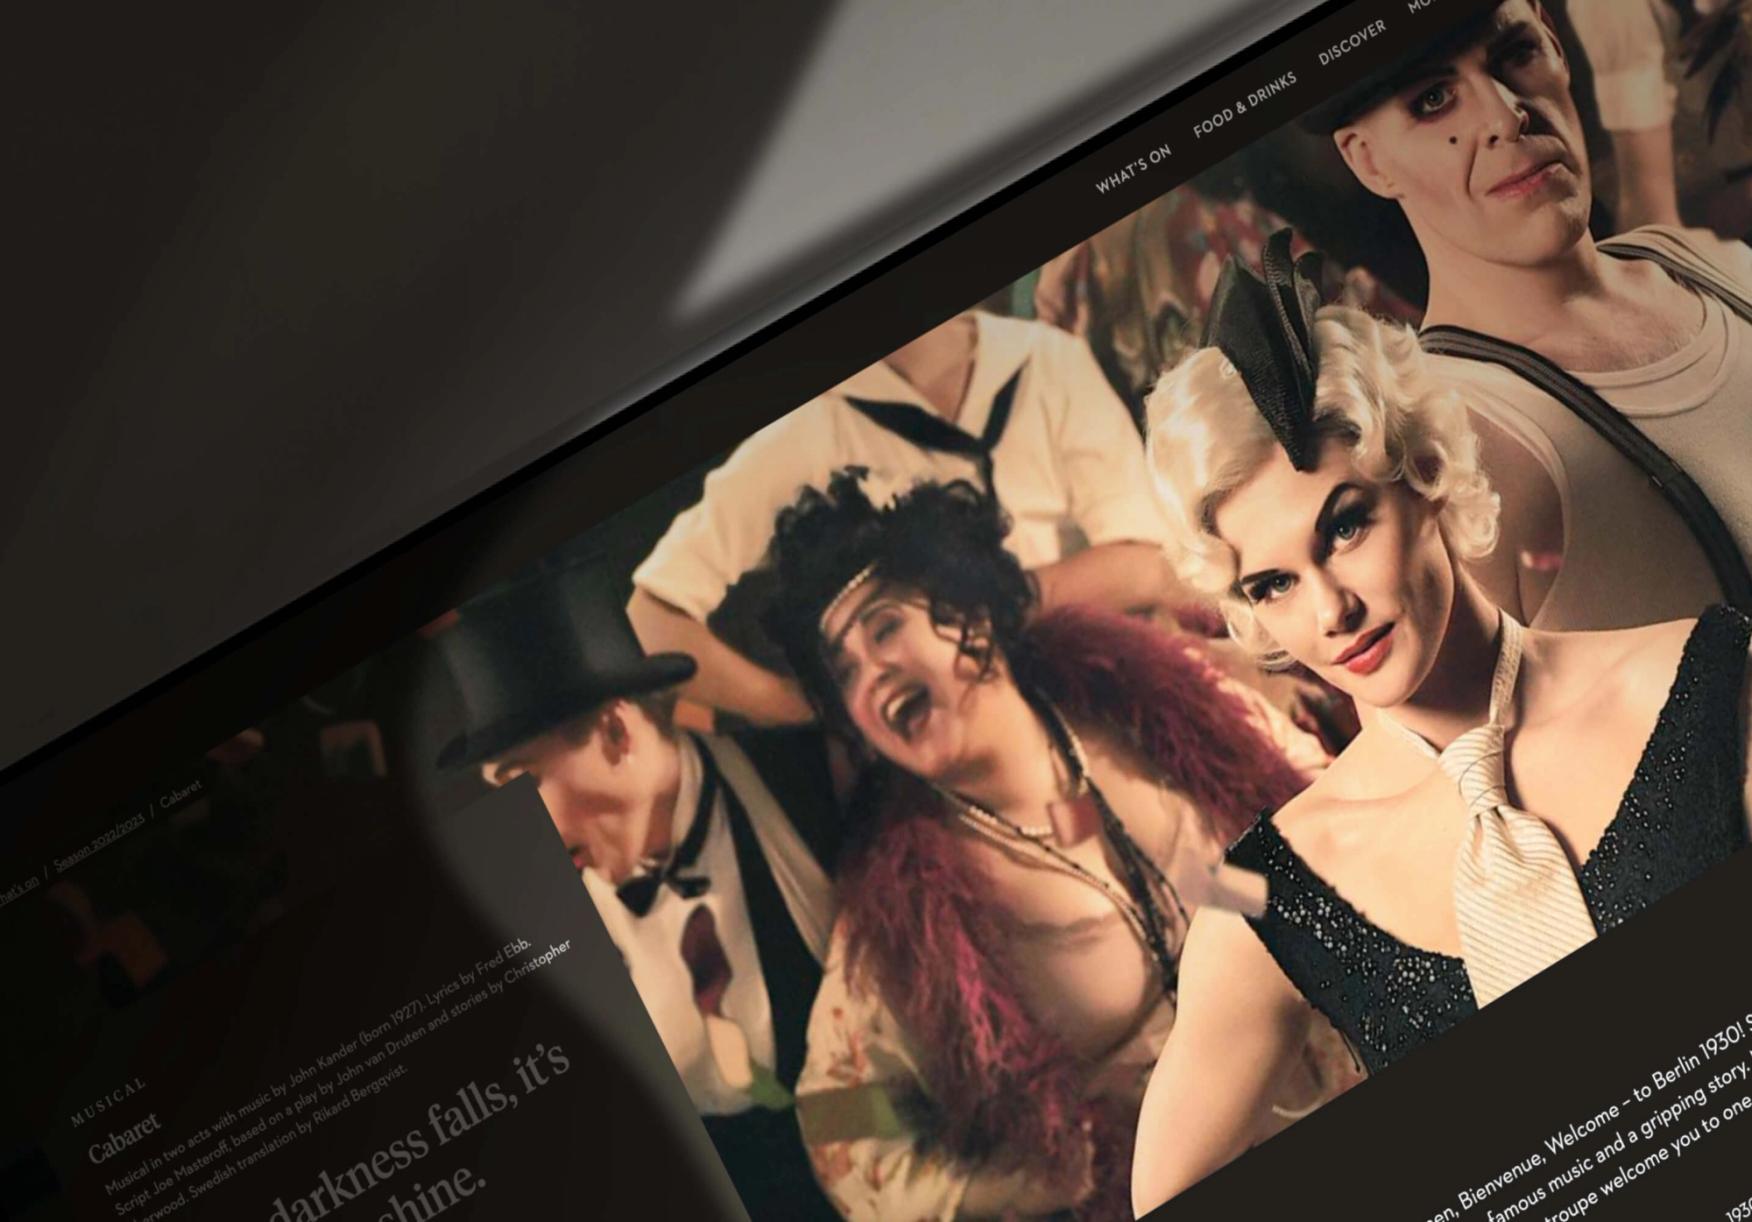 The Göteborgsoperan website shown on a laptop, with the image of a 1920's style woman with blonde hair.